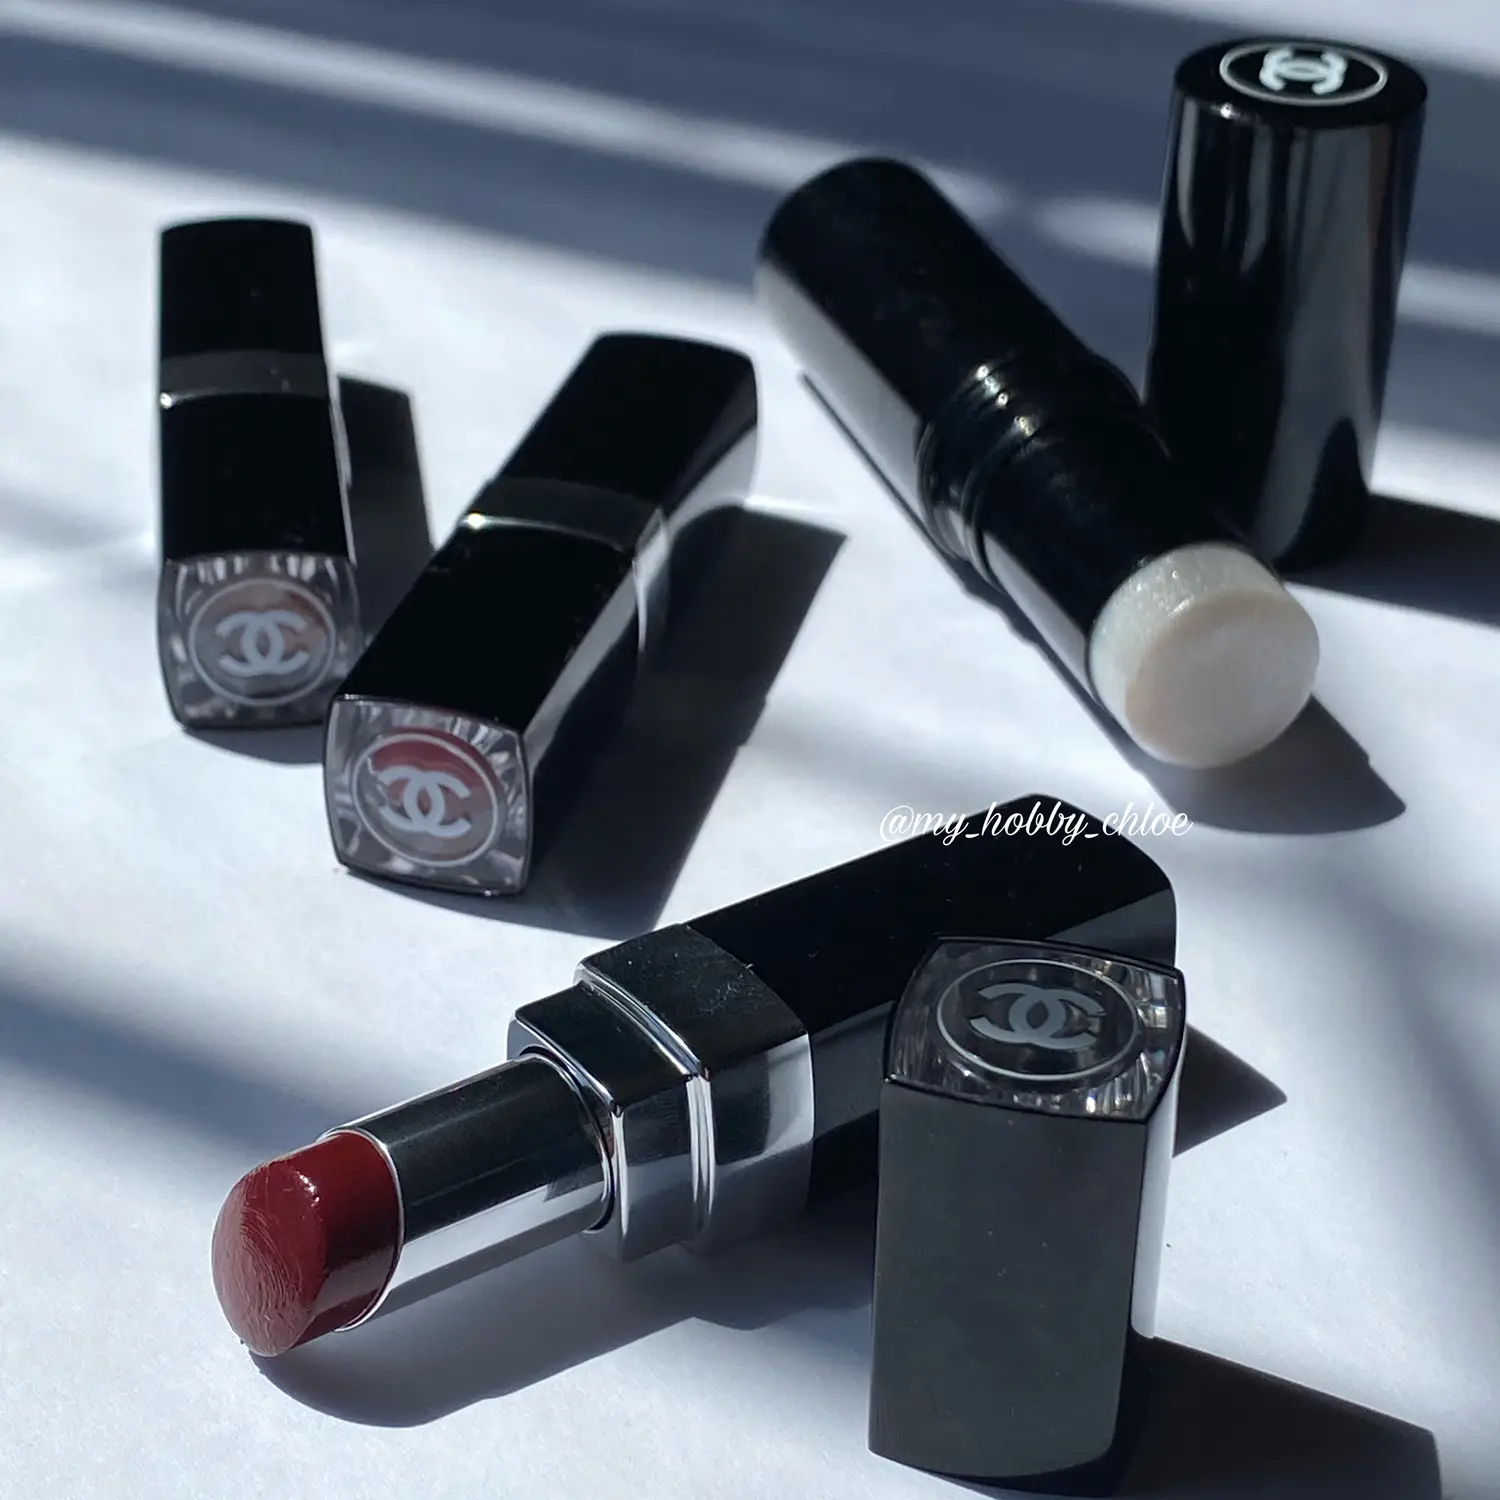 CHANEL ROUGE COCO BLOOM LIPSTICKS Swatches & Review